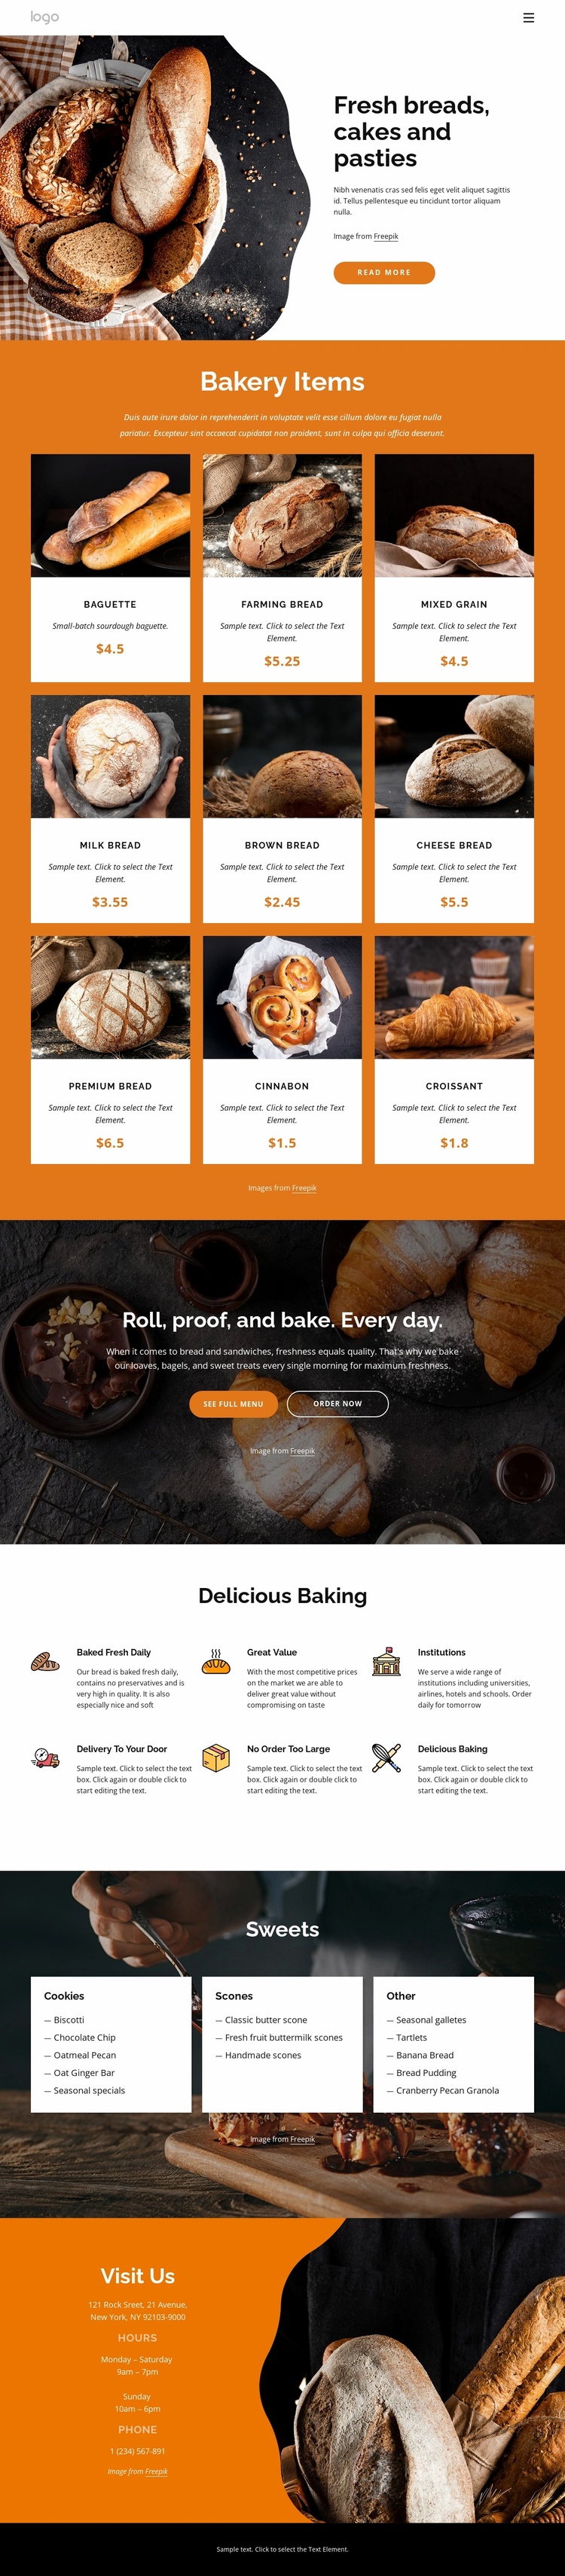 Fresh breads and cakes Landing Page